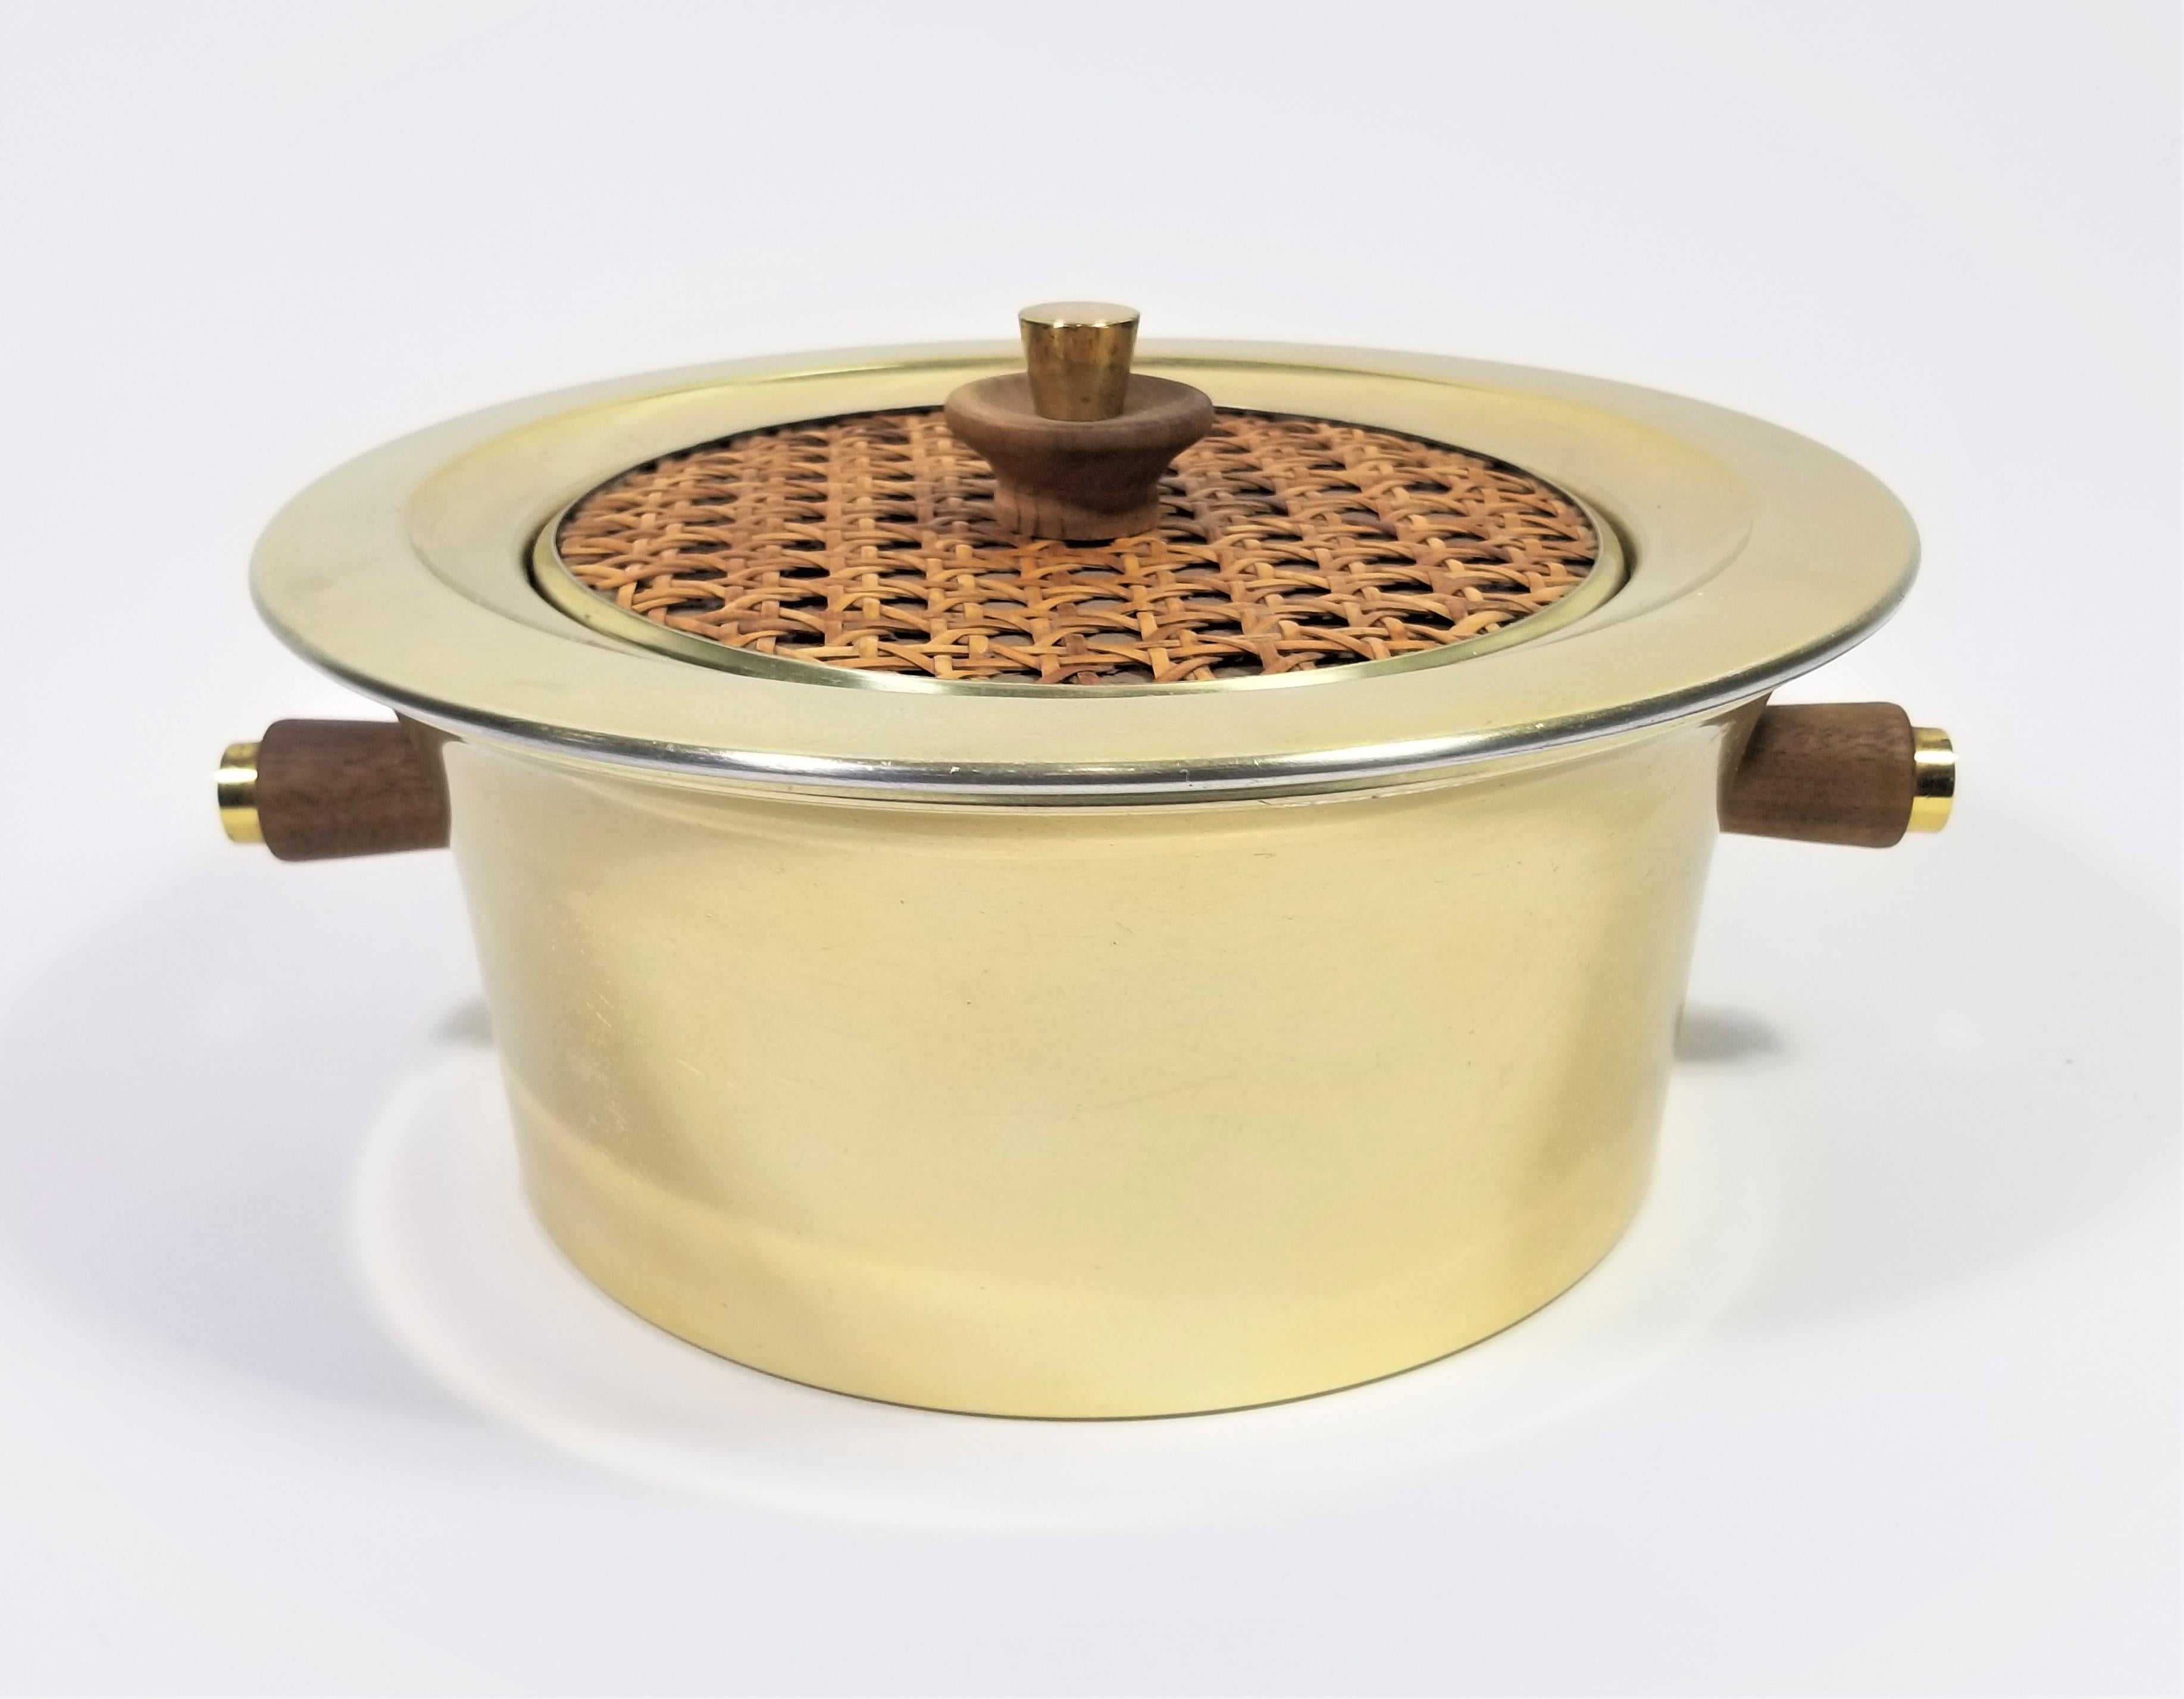 1960s Mid Century Signed Georges Briard Lidded Serving Bowl. Brass plated bowl and lid with decorative caning or rattan on lid. Wooden handles with brass accents. Removable Pyrex Glass Bowl. 